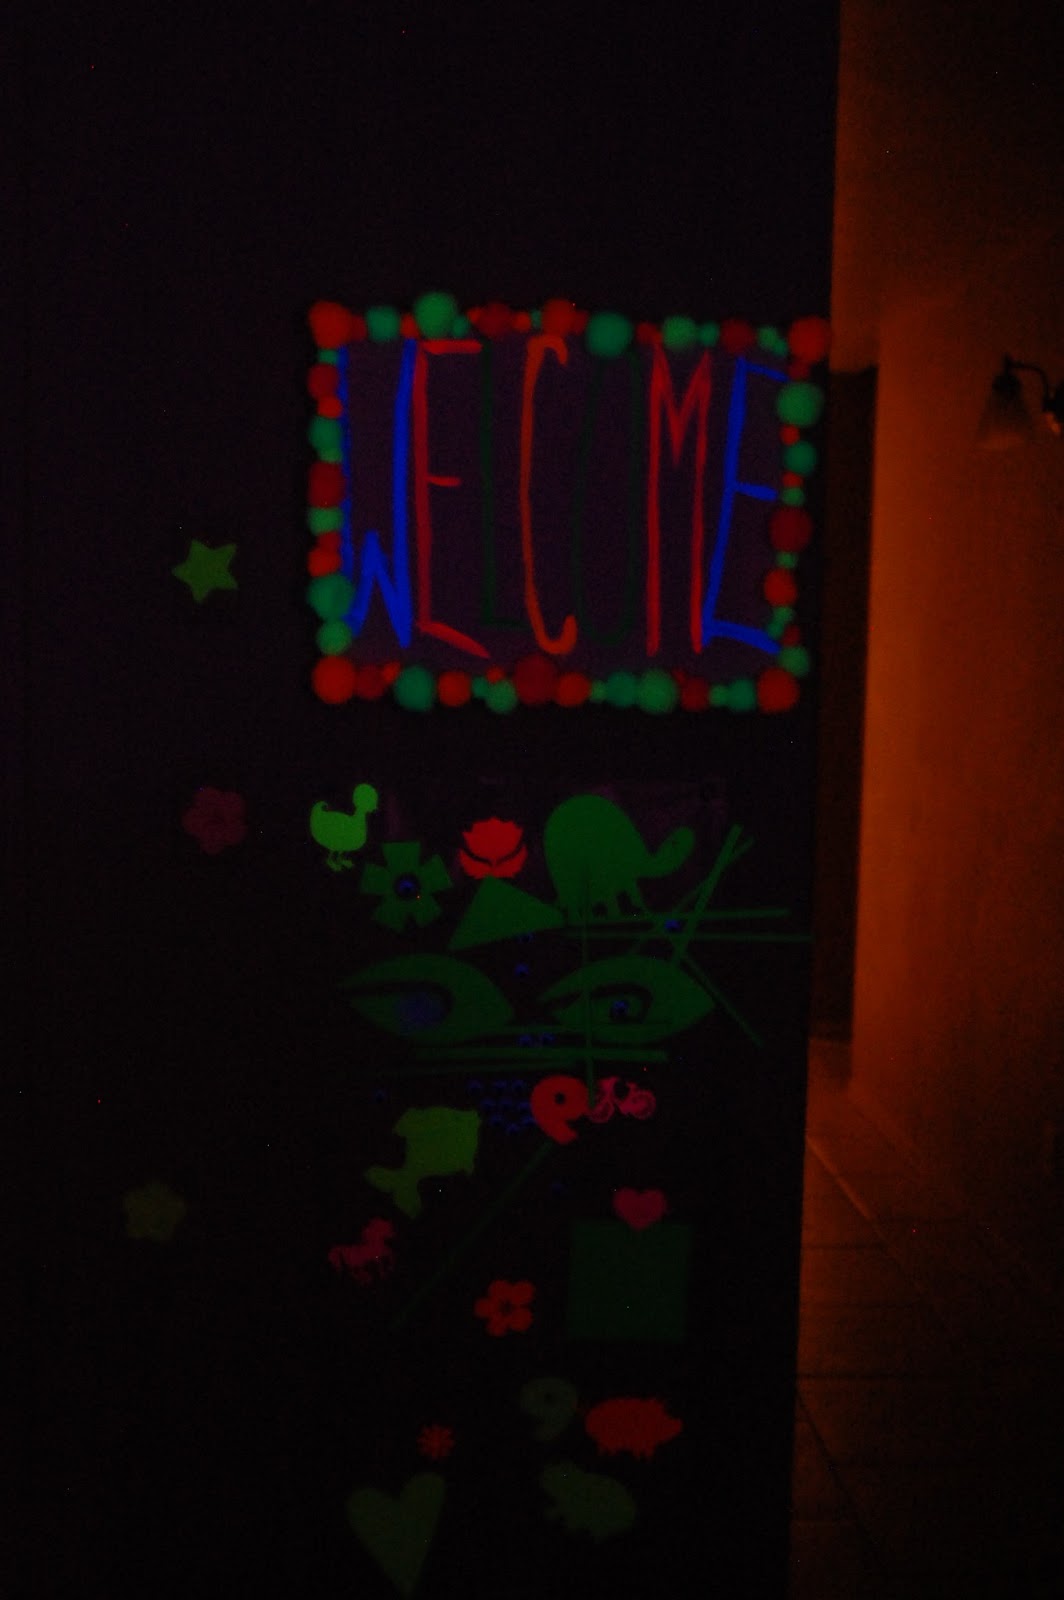 There was clear contact paper on the walls and then tons of neon ...